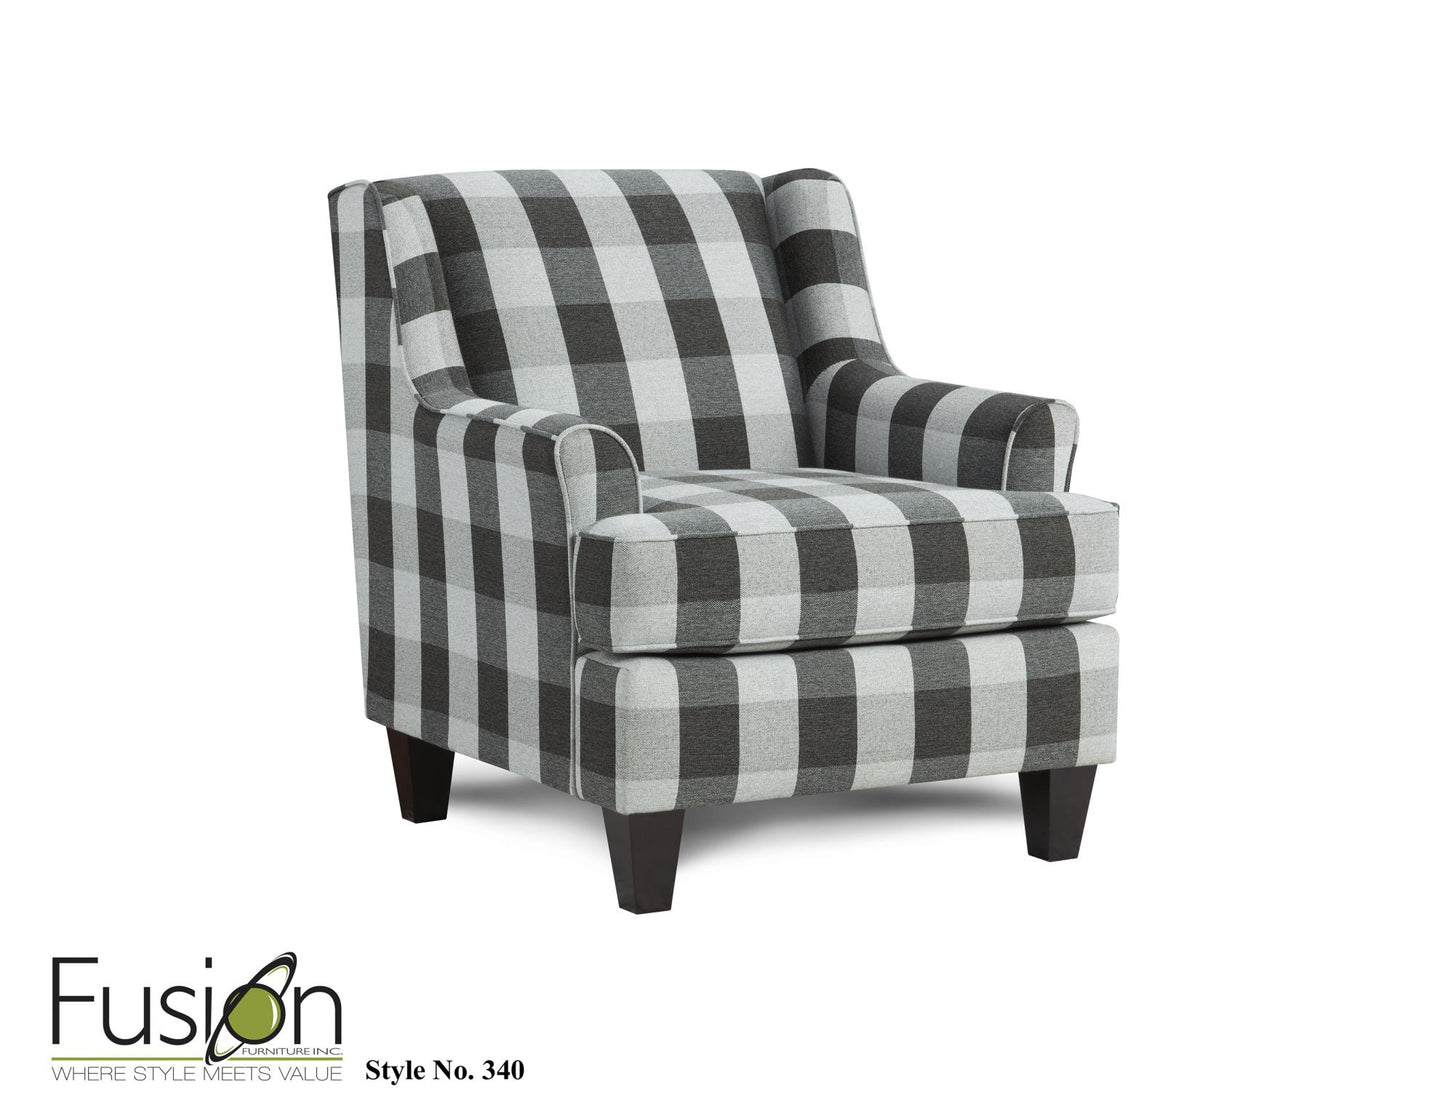 39-00KP Dizzy Iron Sofa and 340 Block Party Ebony Accent Chair